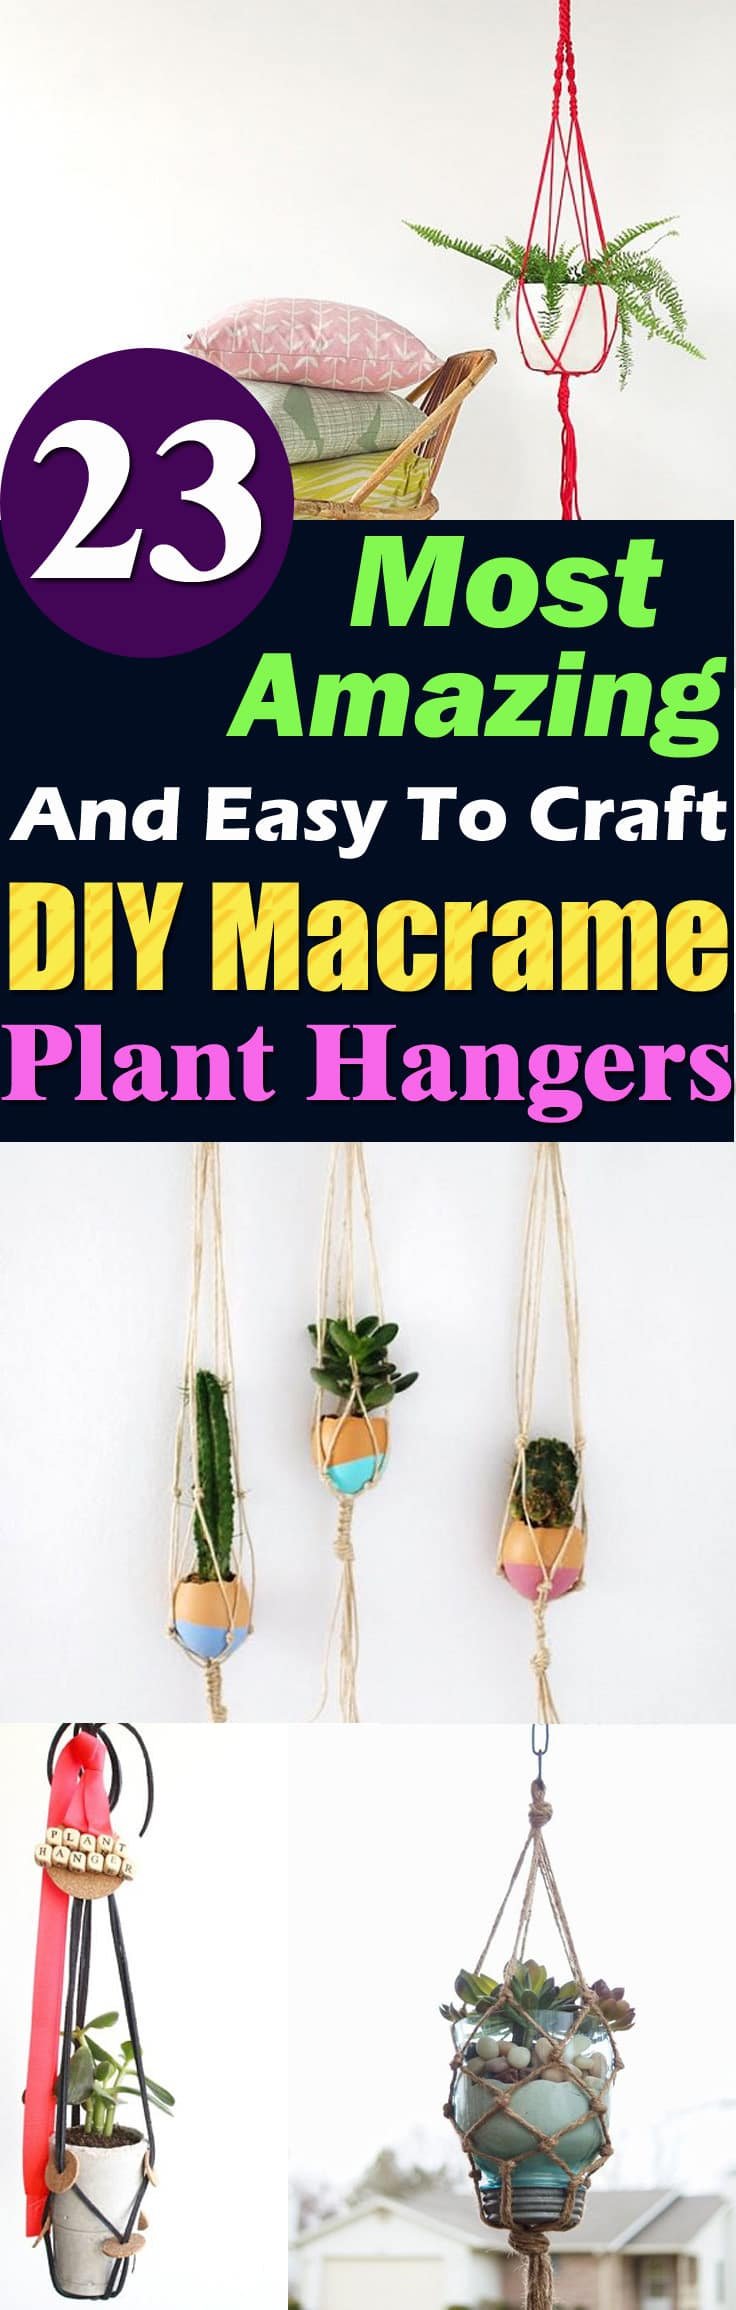 Macrame plant hangers are becoming popular, they're a stylish way to create hanging planters out of ordinary pots!